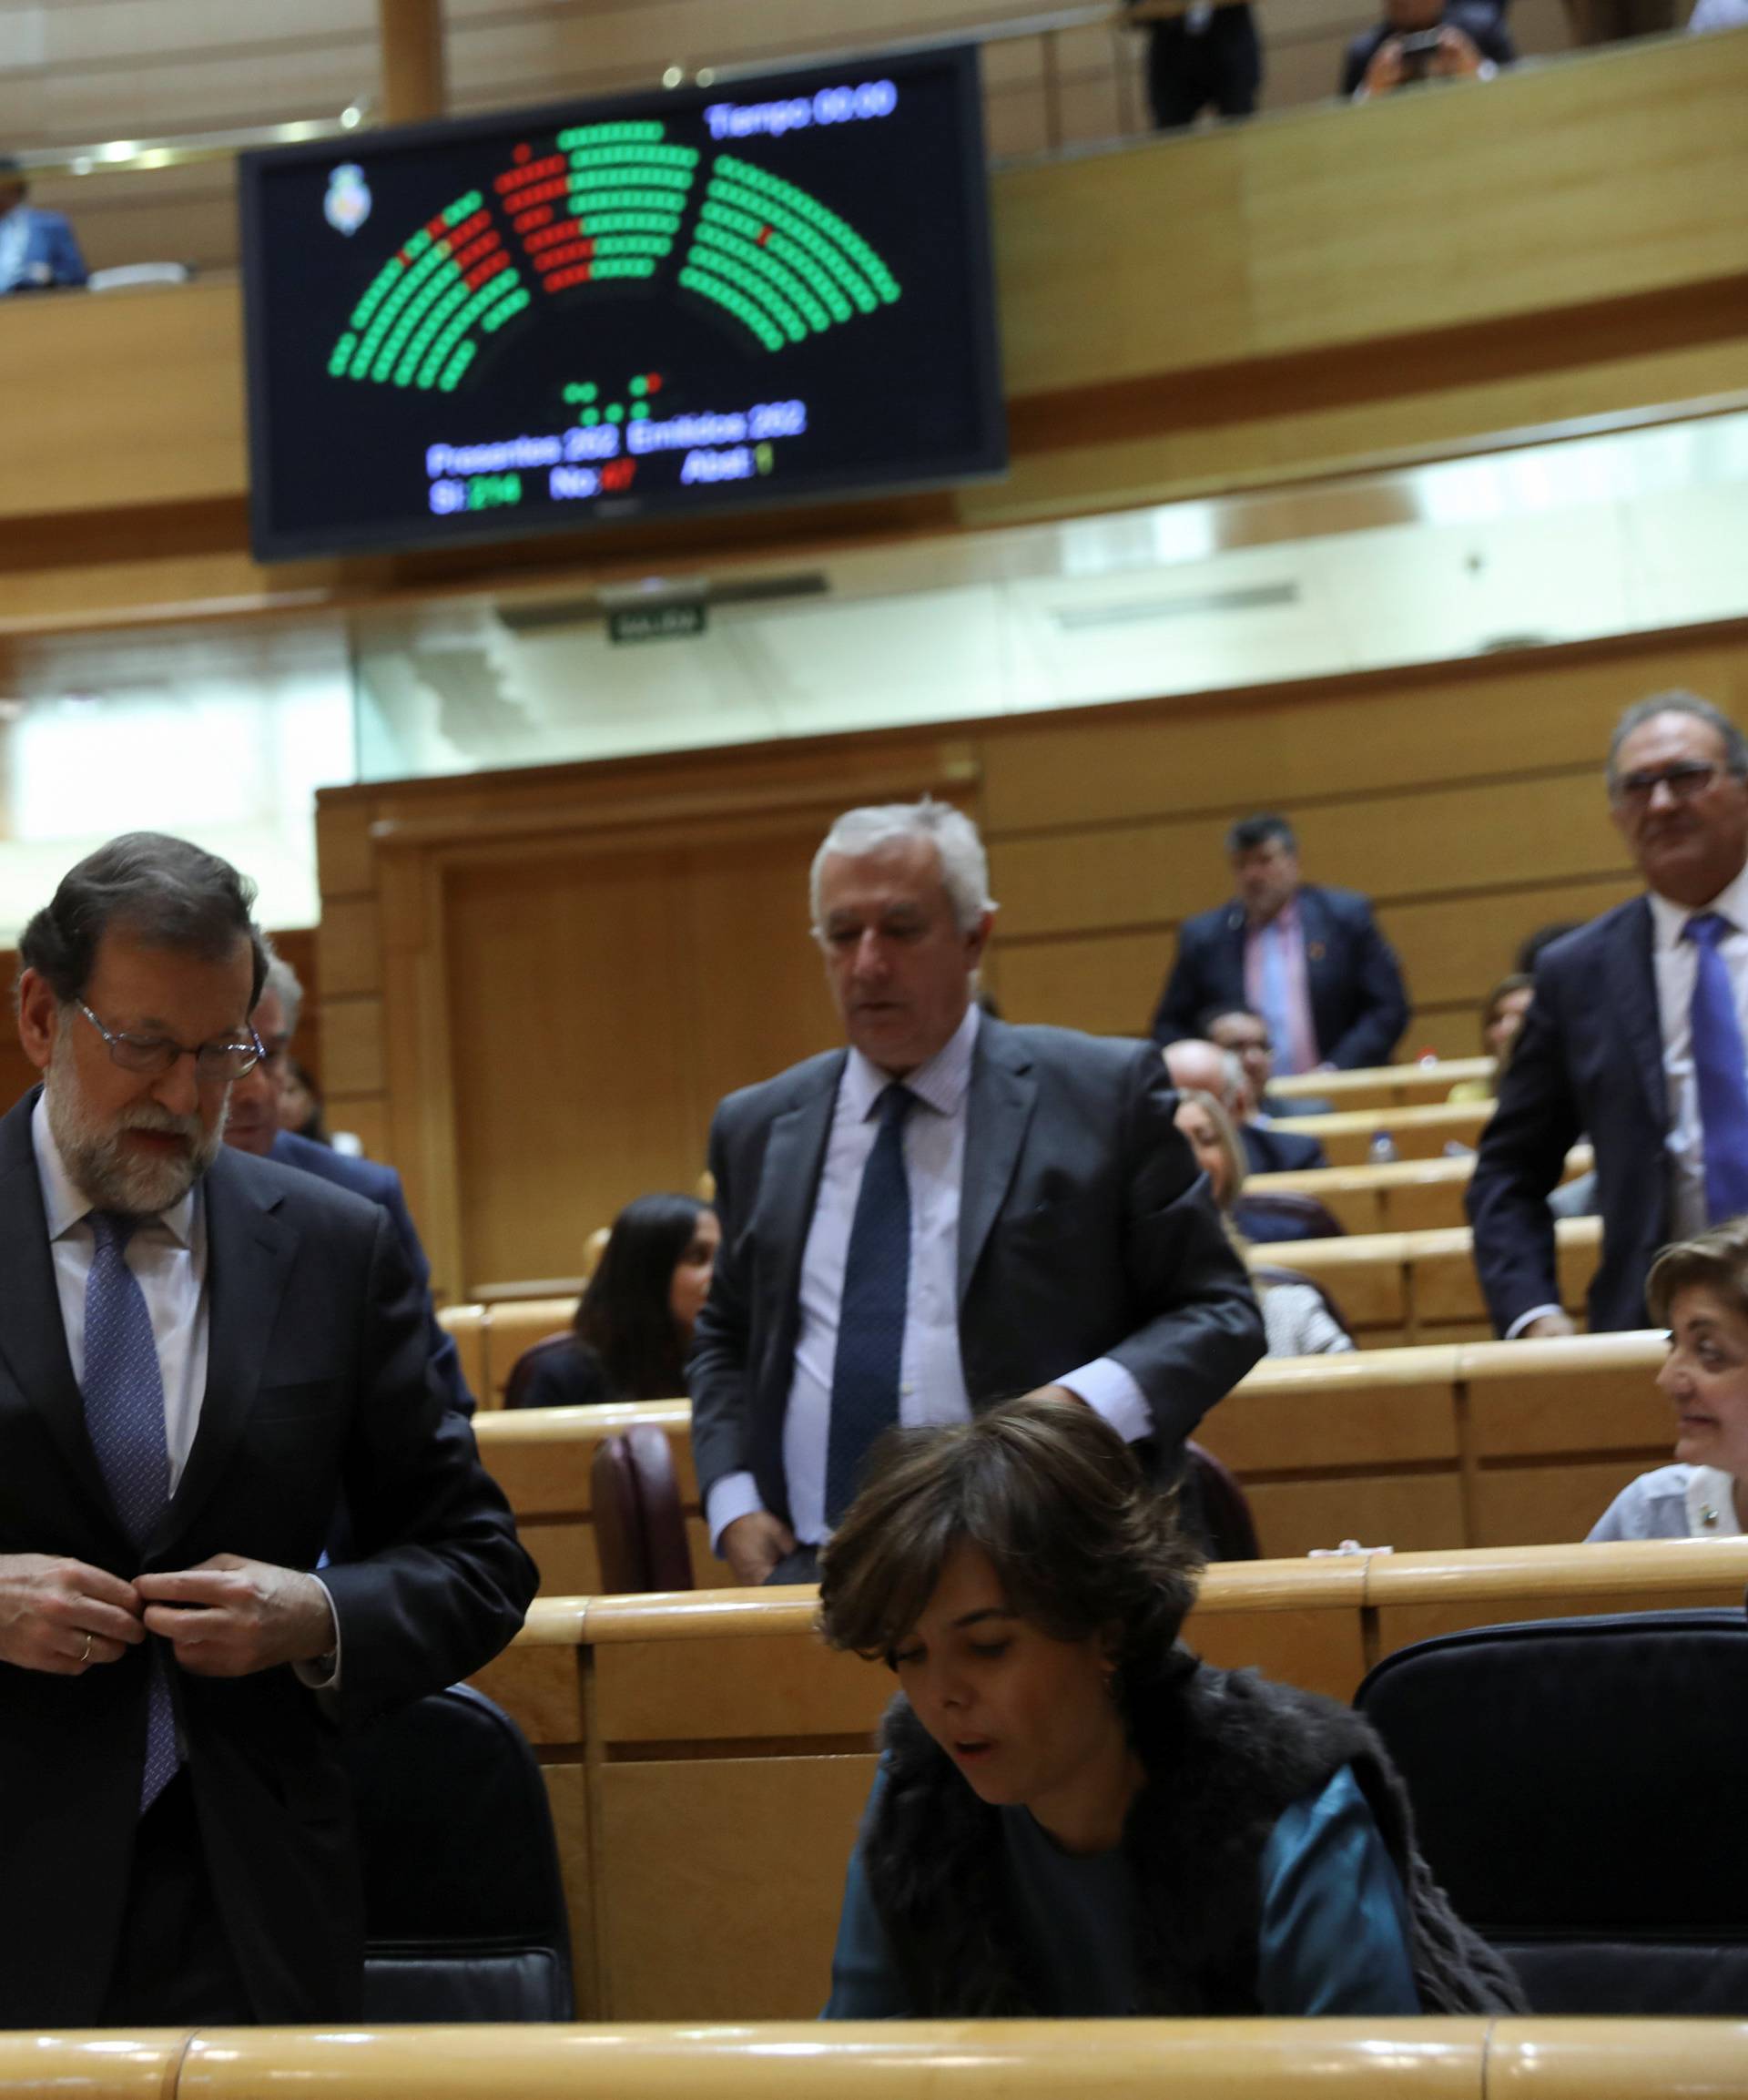 Spain's PM Rajoy and Deputy PM Saenz de Santamaria leave their seats as the results of a vote in the upper house Senate approving emergency measures to take control of the Catalan government are seen in a scoreboard in Madrid